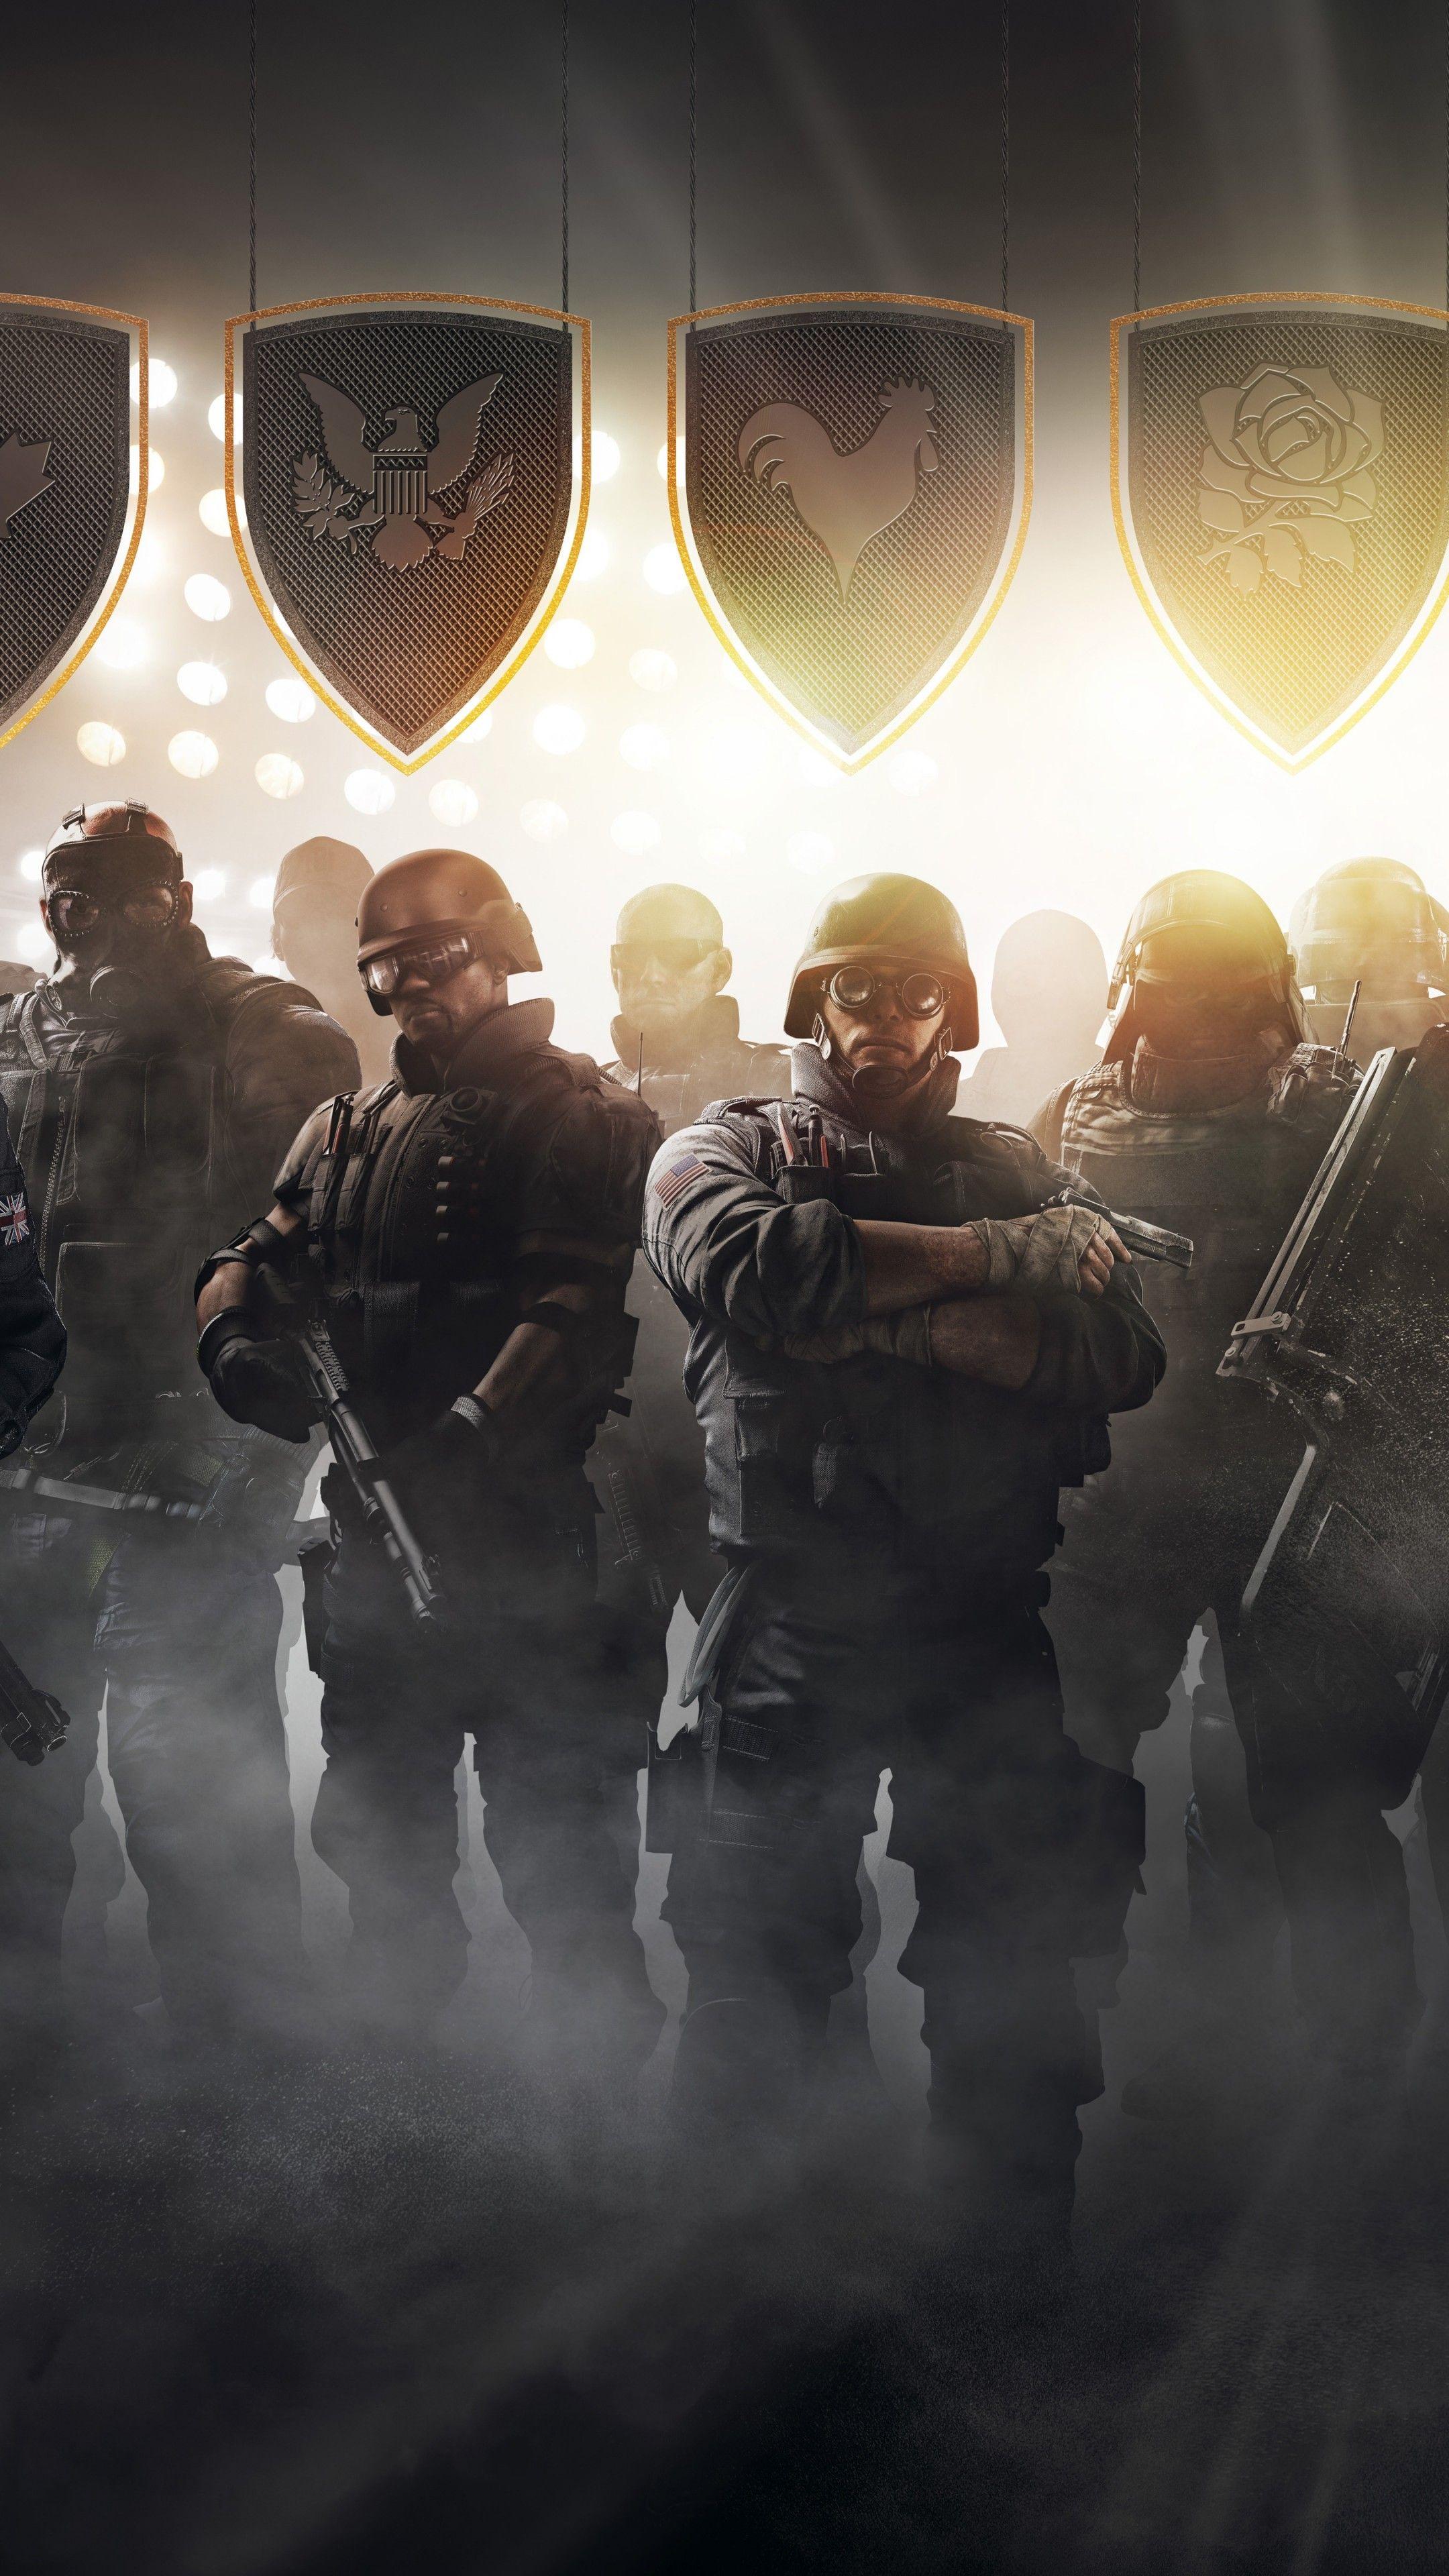 Wallpapers Tom Clancy's Rainbow Six Siege Pro League, game, shooter